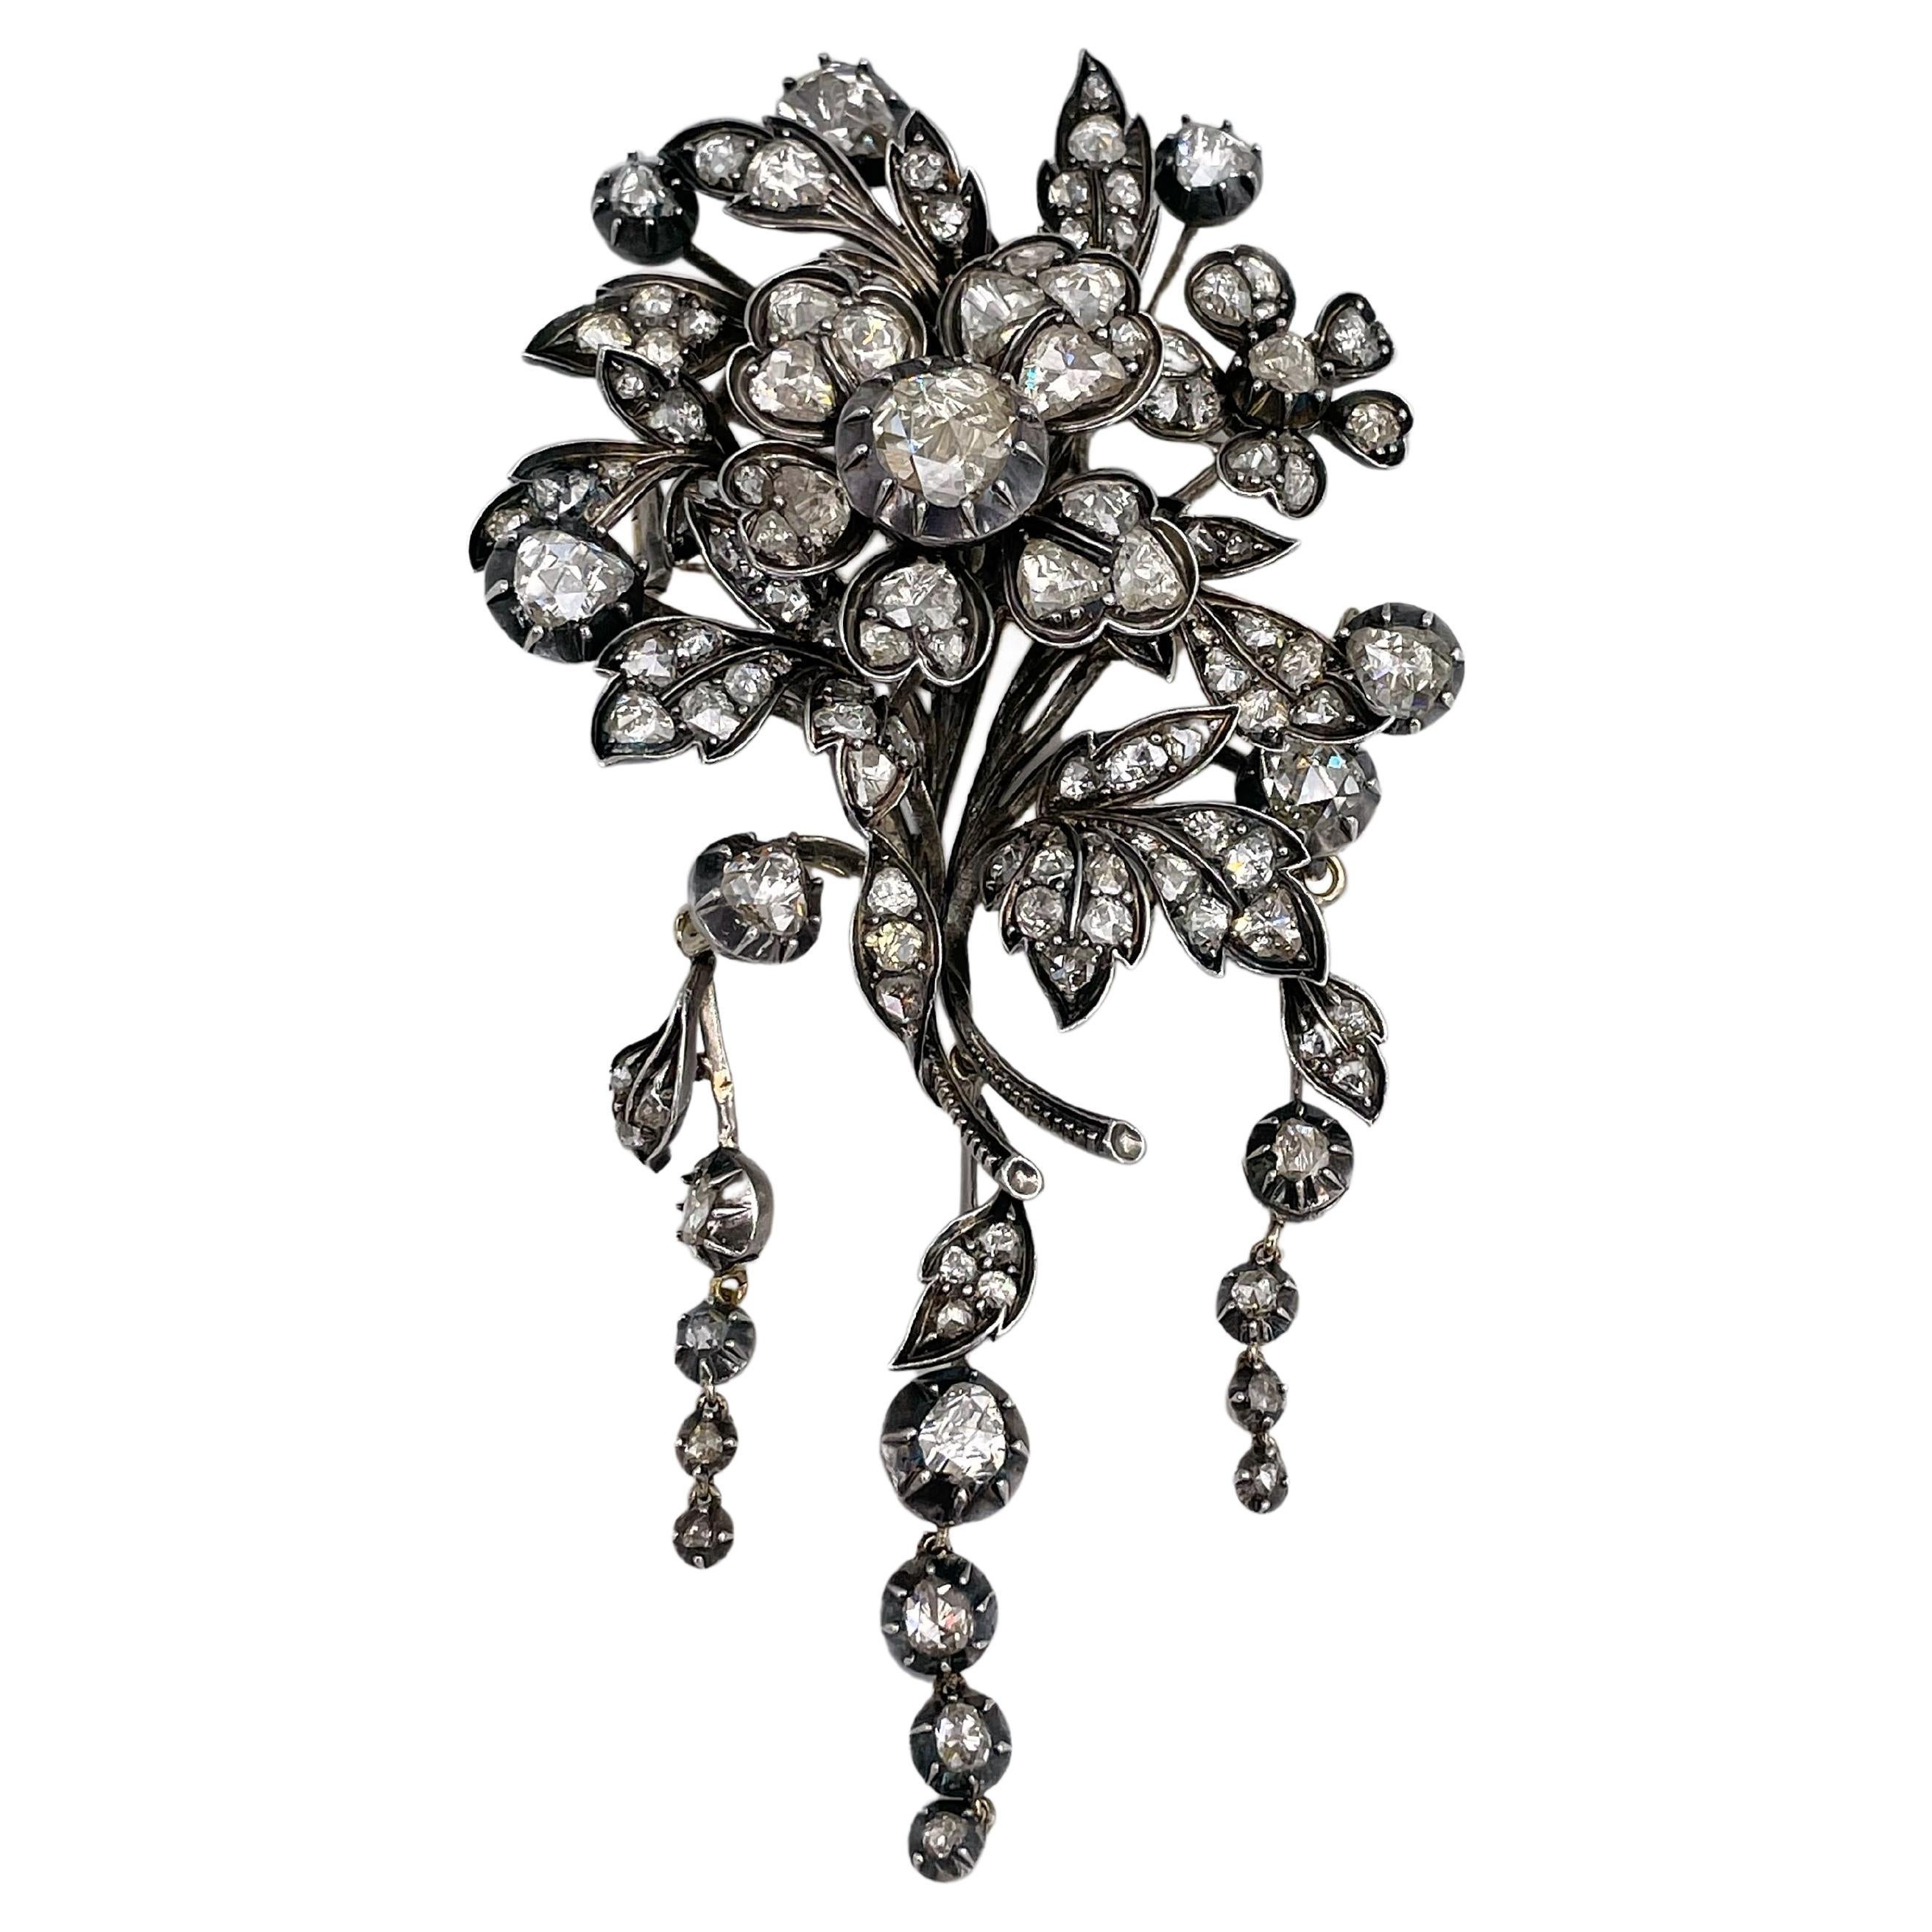 Certified Victorian Gold 11.70 Carat Diamond Tremblent Floral Corsage Pin Brooch For Sale